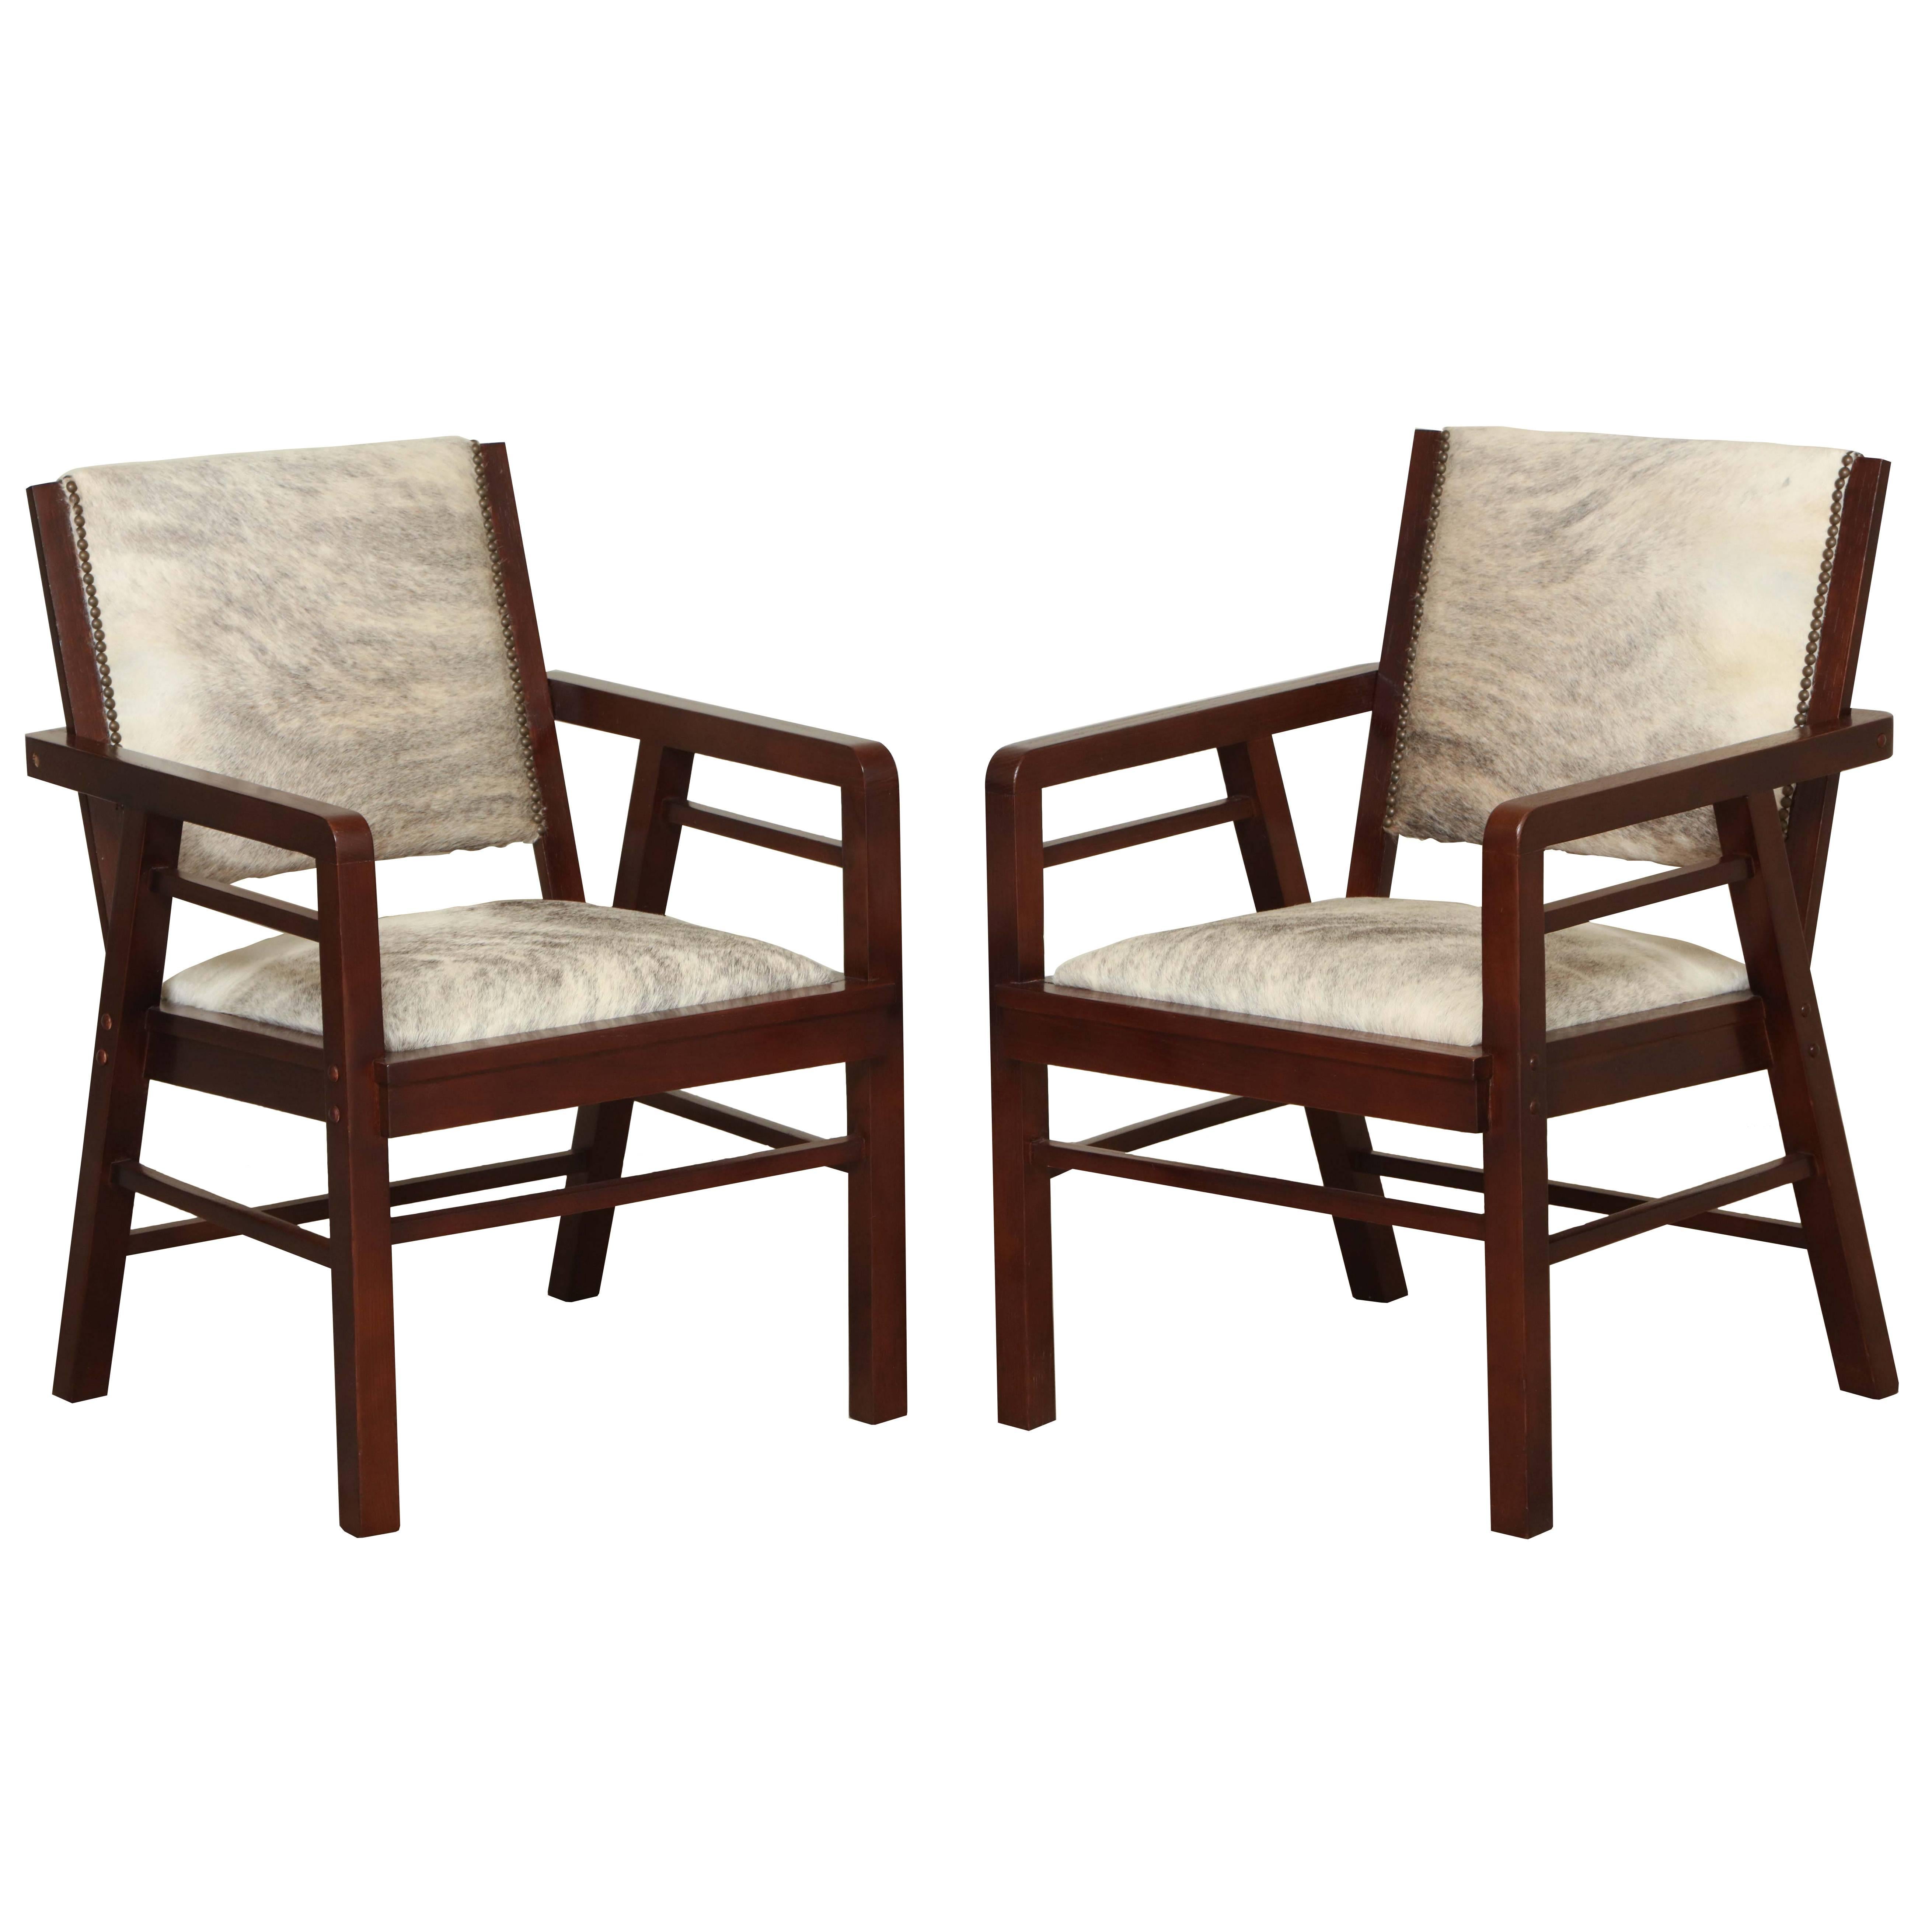 Pair of Oak Chairs For Sale